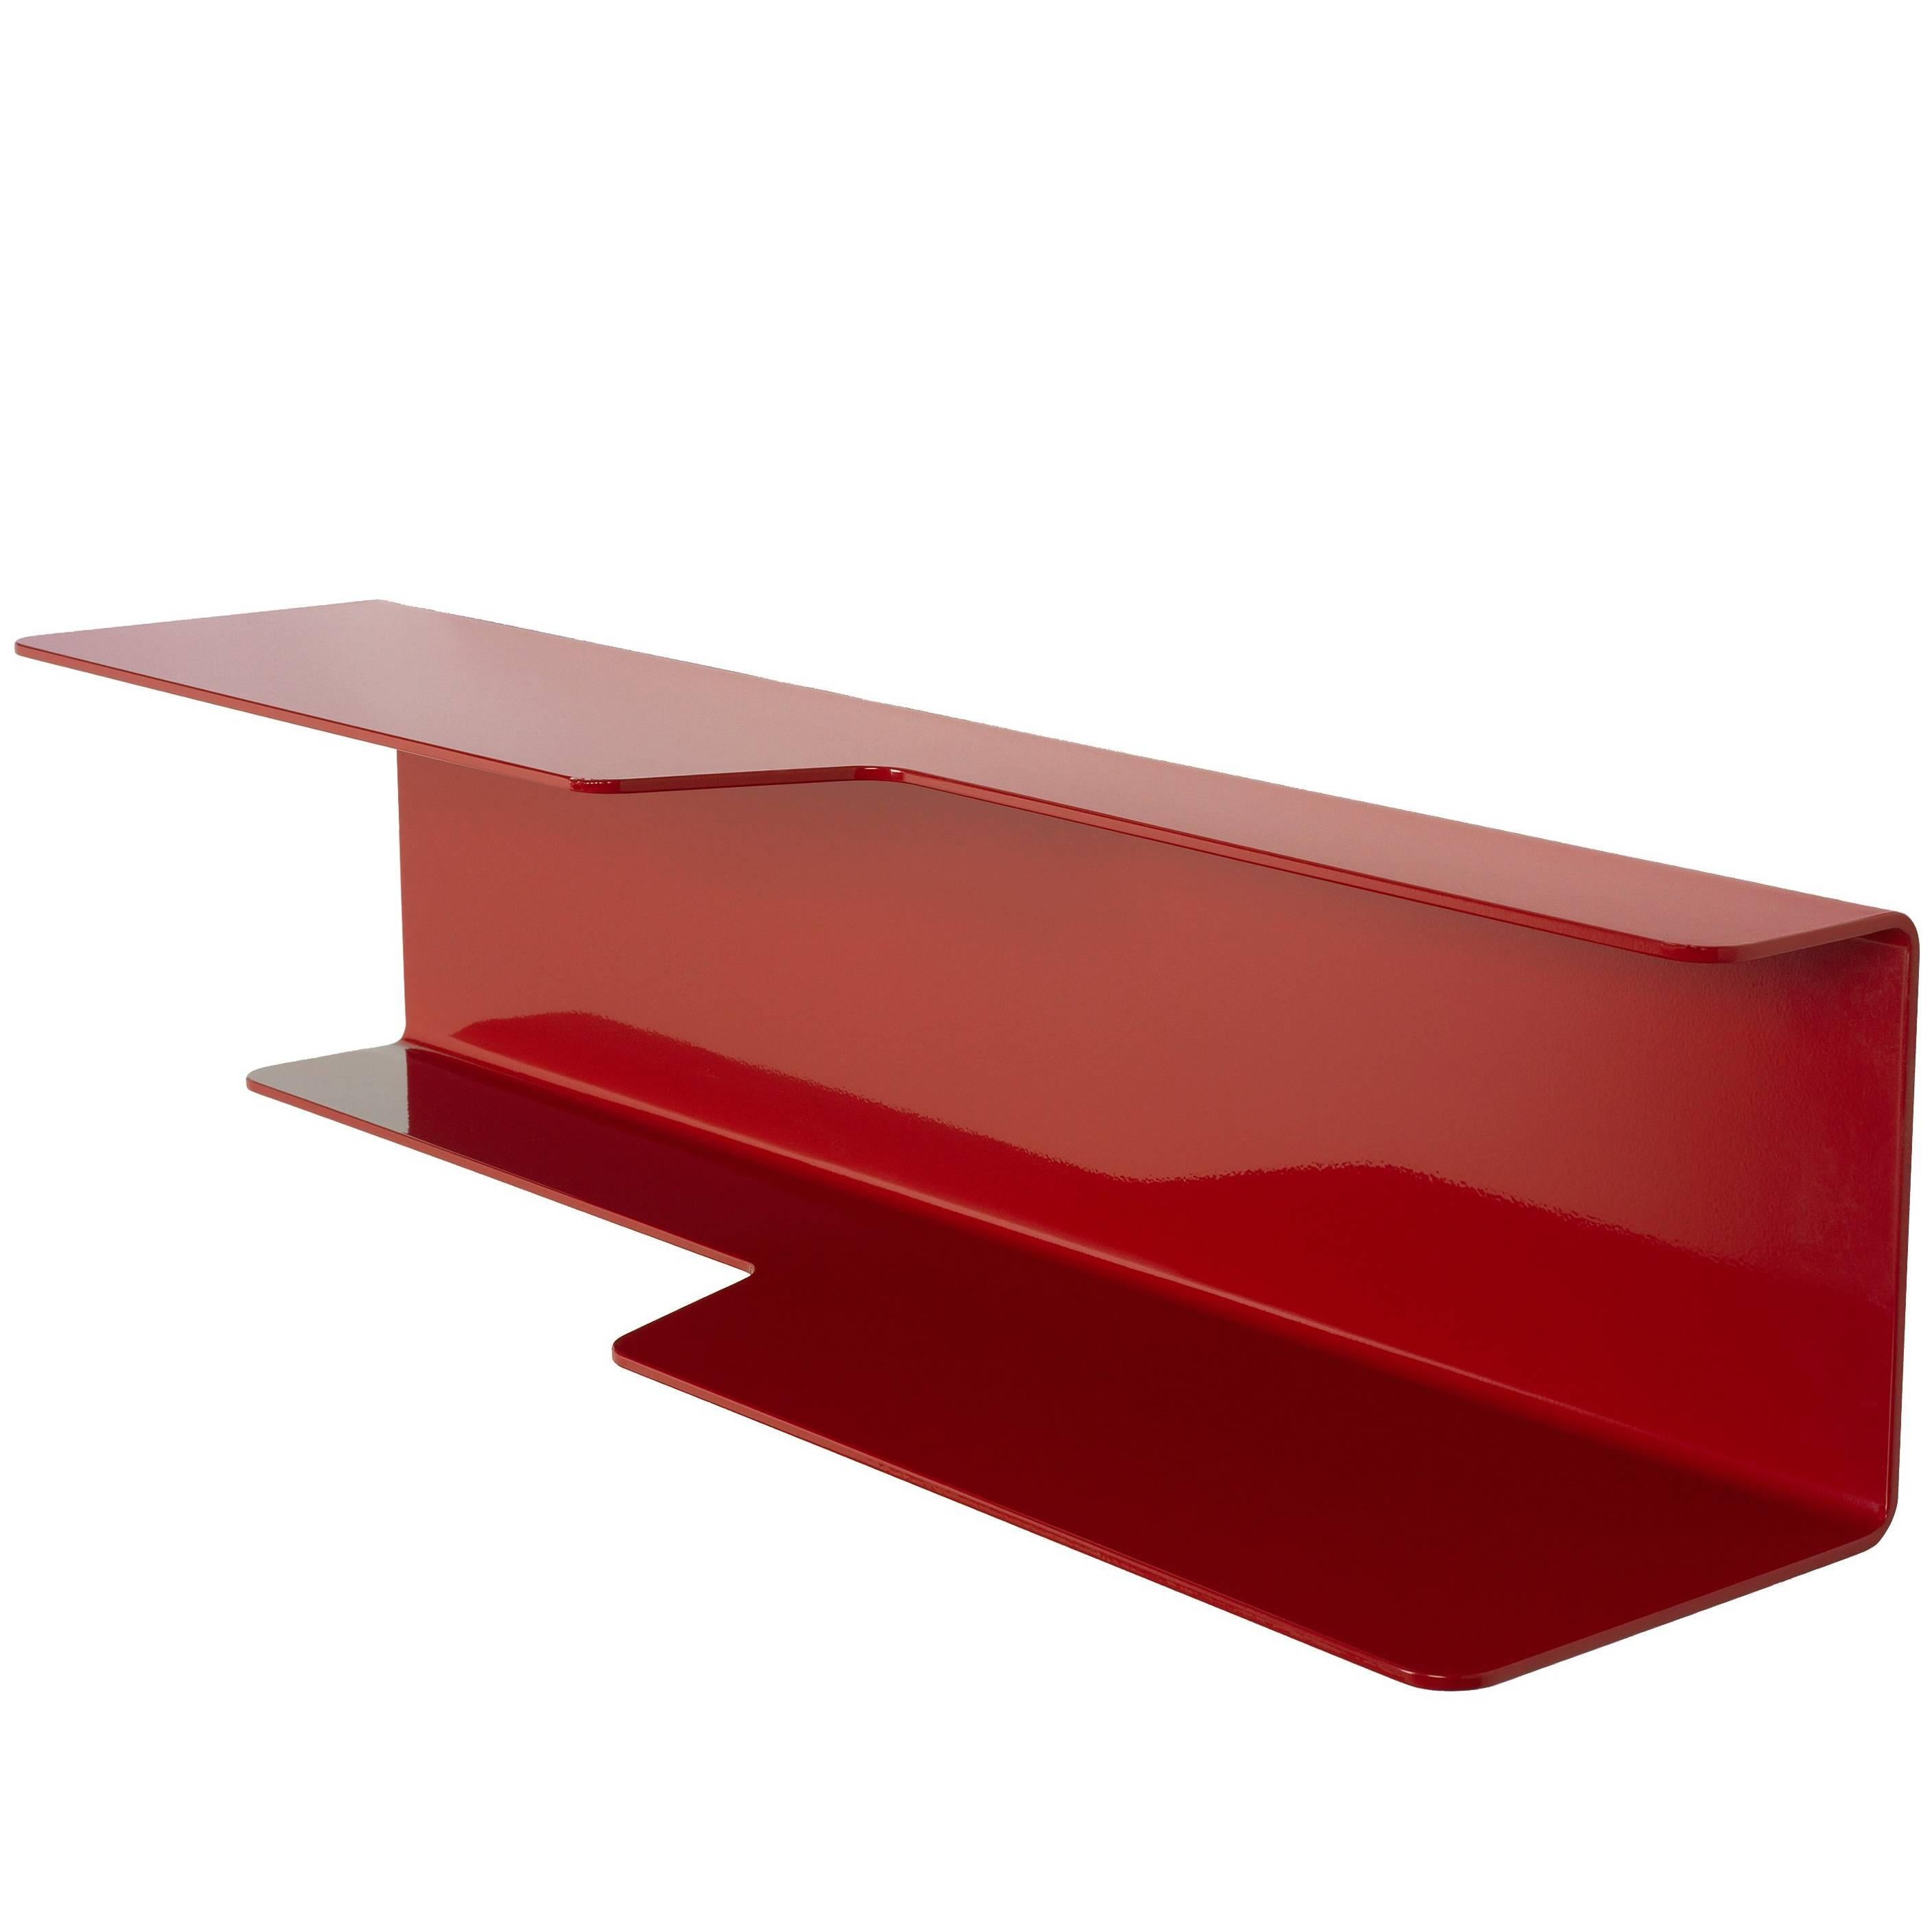 The wall-mounted, tidal shelf is formed out of 1/4 inch thick, powder-coated aluminum. Each shelf has a welded U-channel to the reverse of the shelf and easily mounts on included custom-bent steel Z-clips. The shelf is available in numerous powder